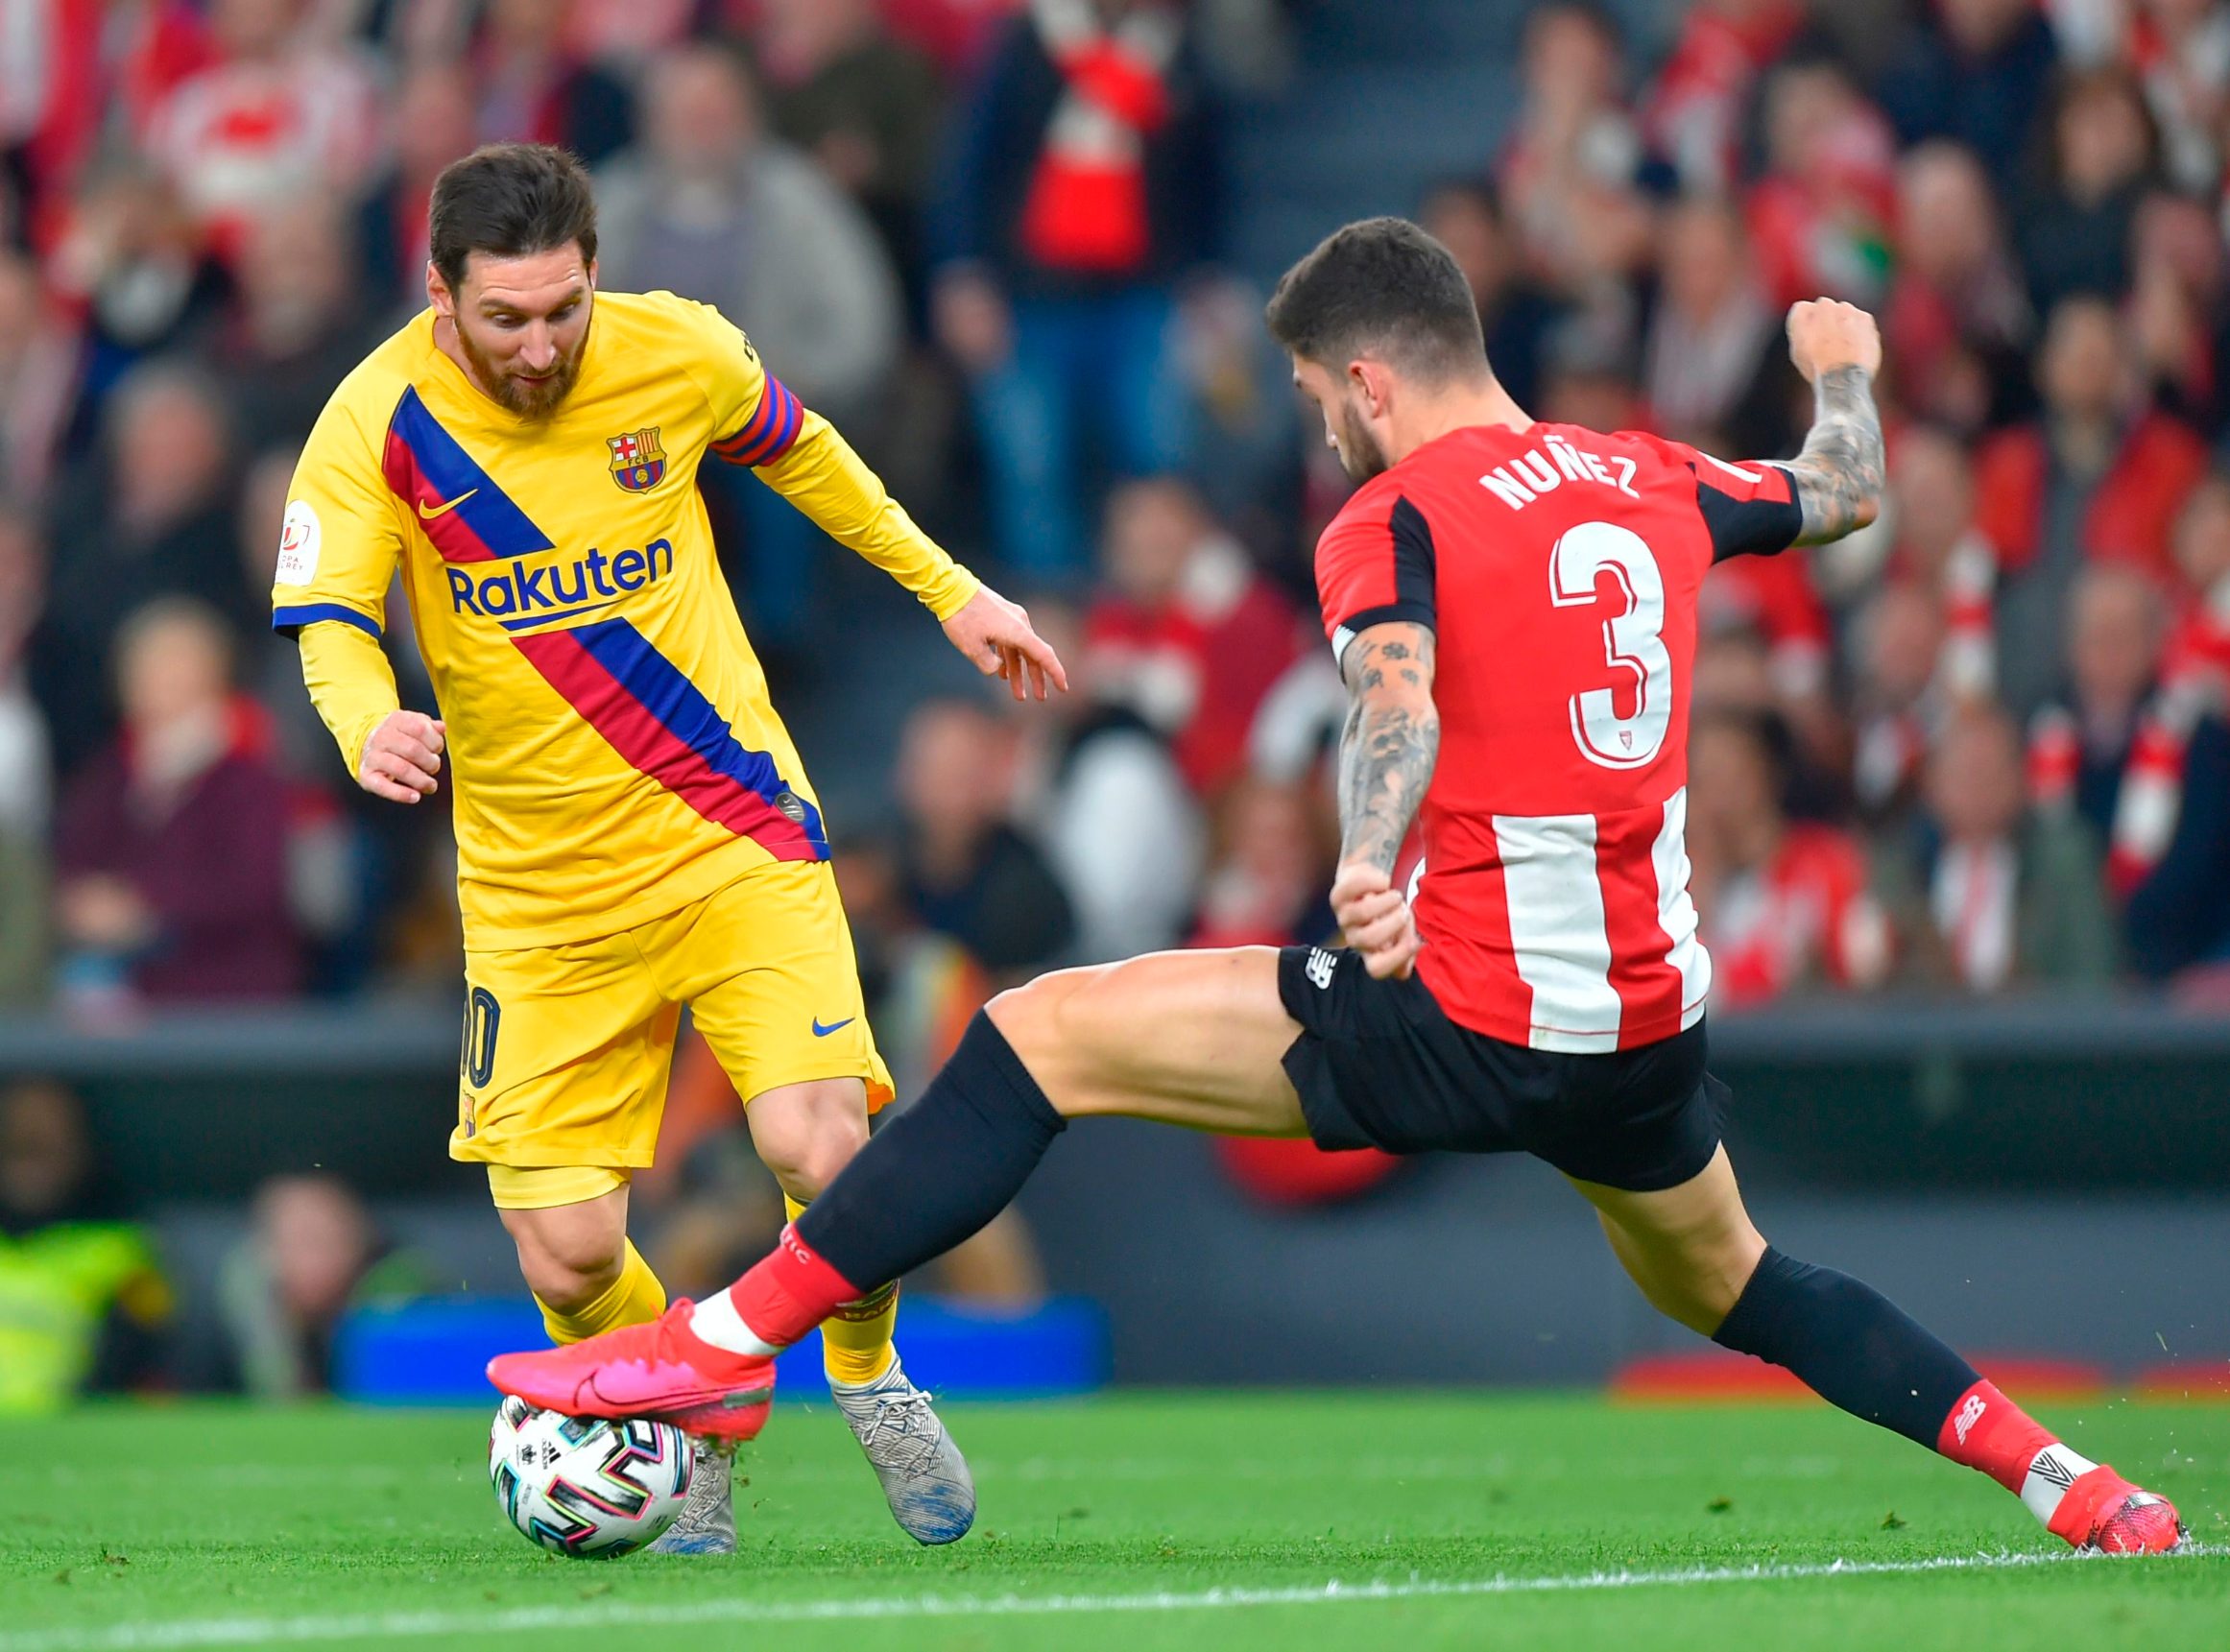 Barcelona's Argentinian forward Lionel Messi (L) is tackled by Athletic Bilbao's Spanish defender Unai Nunez during the Spanish Copa del Rey (King's Cup) quarter-final football match Athletic Club Bilbao against FC Barcelona at the San Mames stadium in Bilbao on February 06, 2020. (Photo by ANDER GILLENEA / AFP)